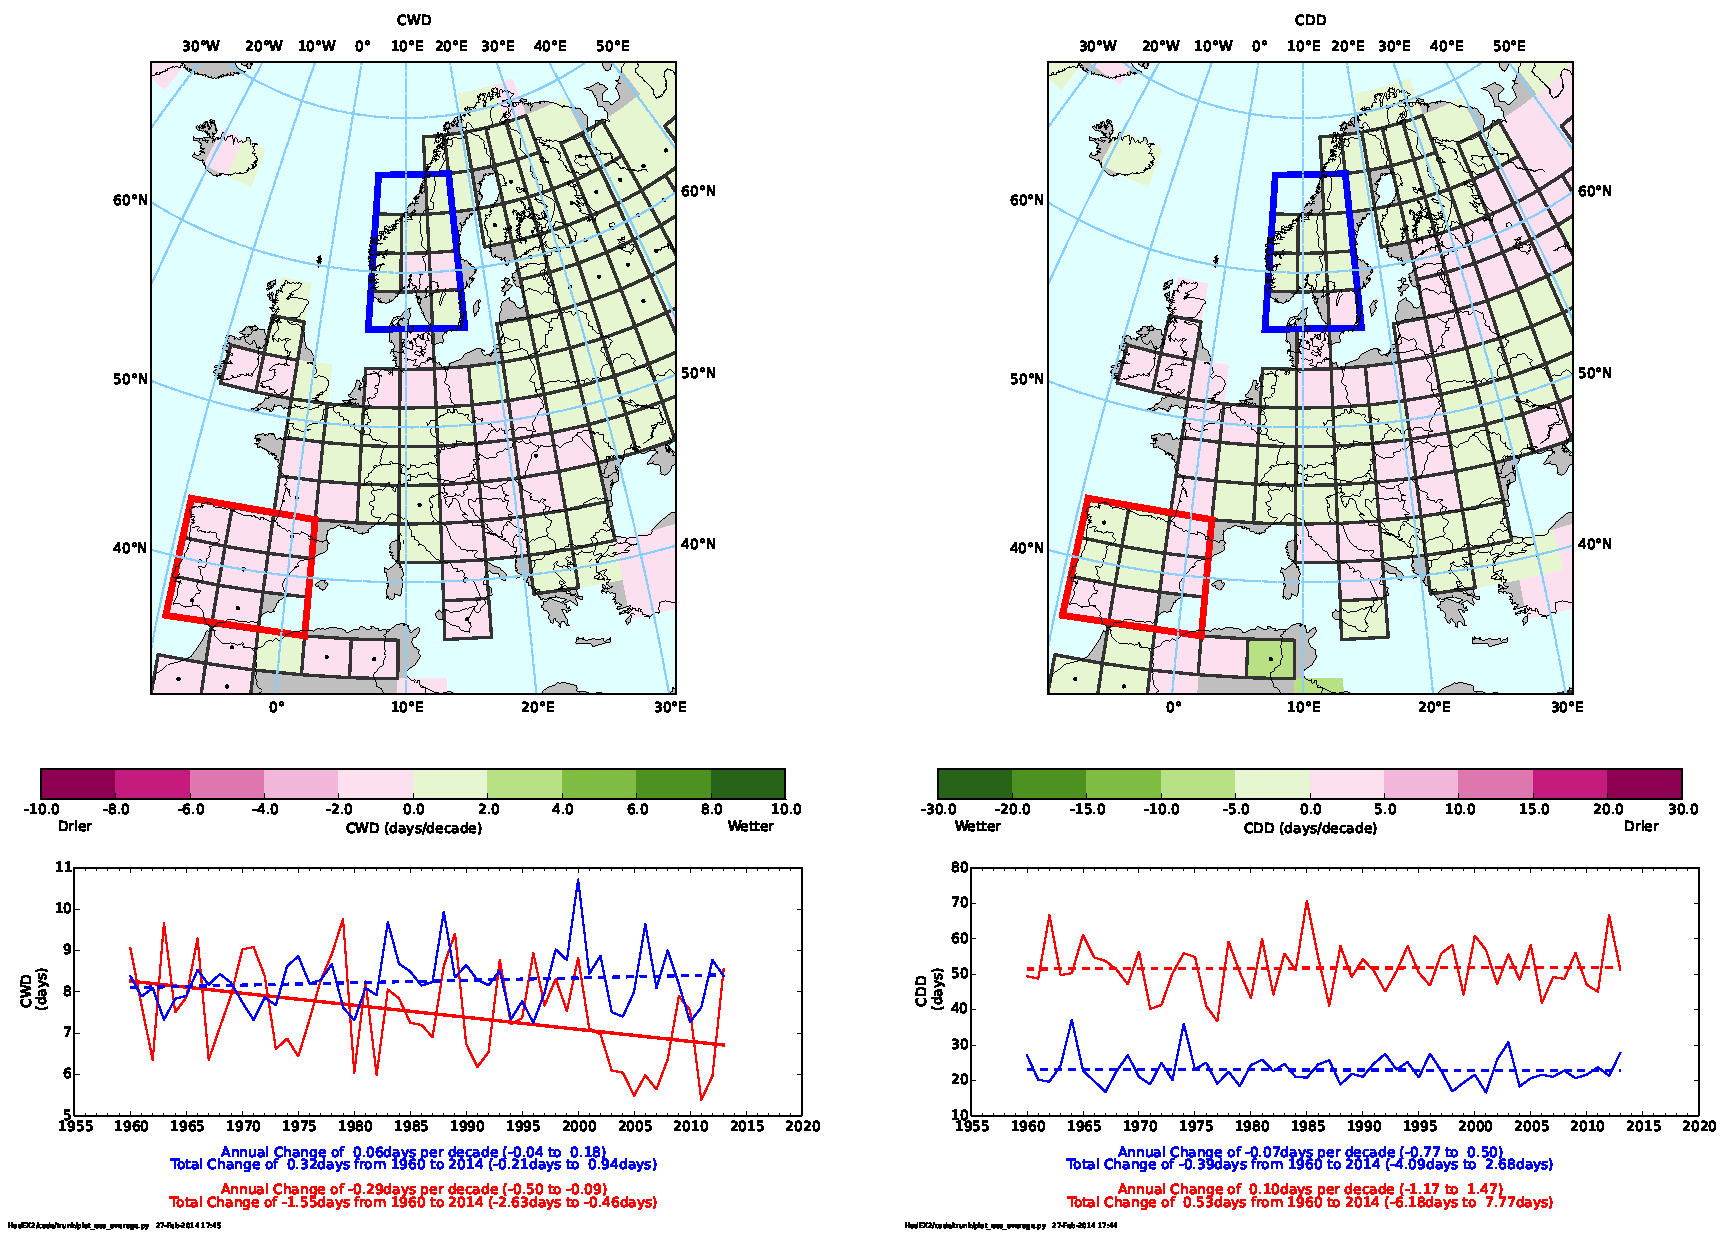 Trends in the duration of wet (left) and dry (right) spells 